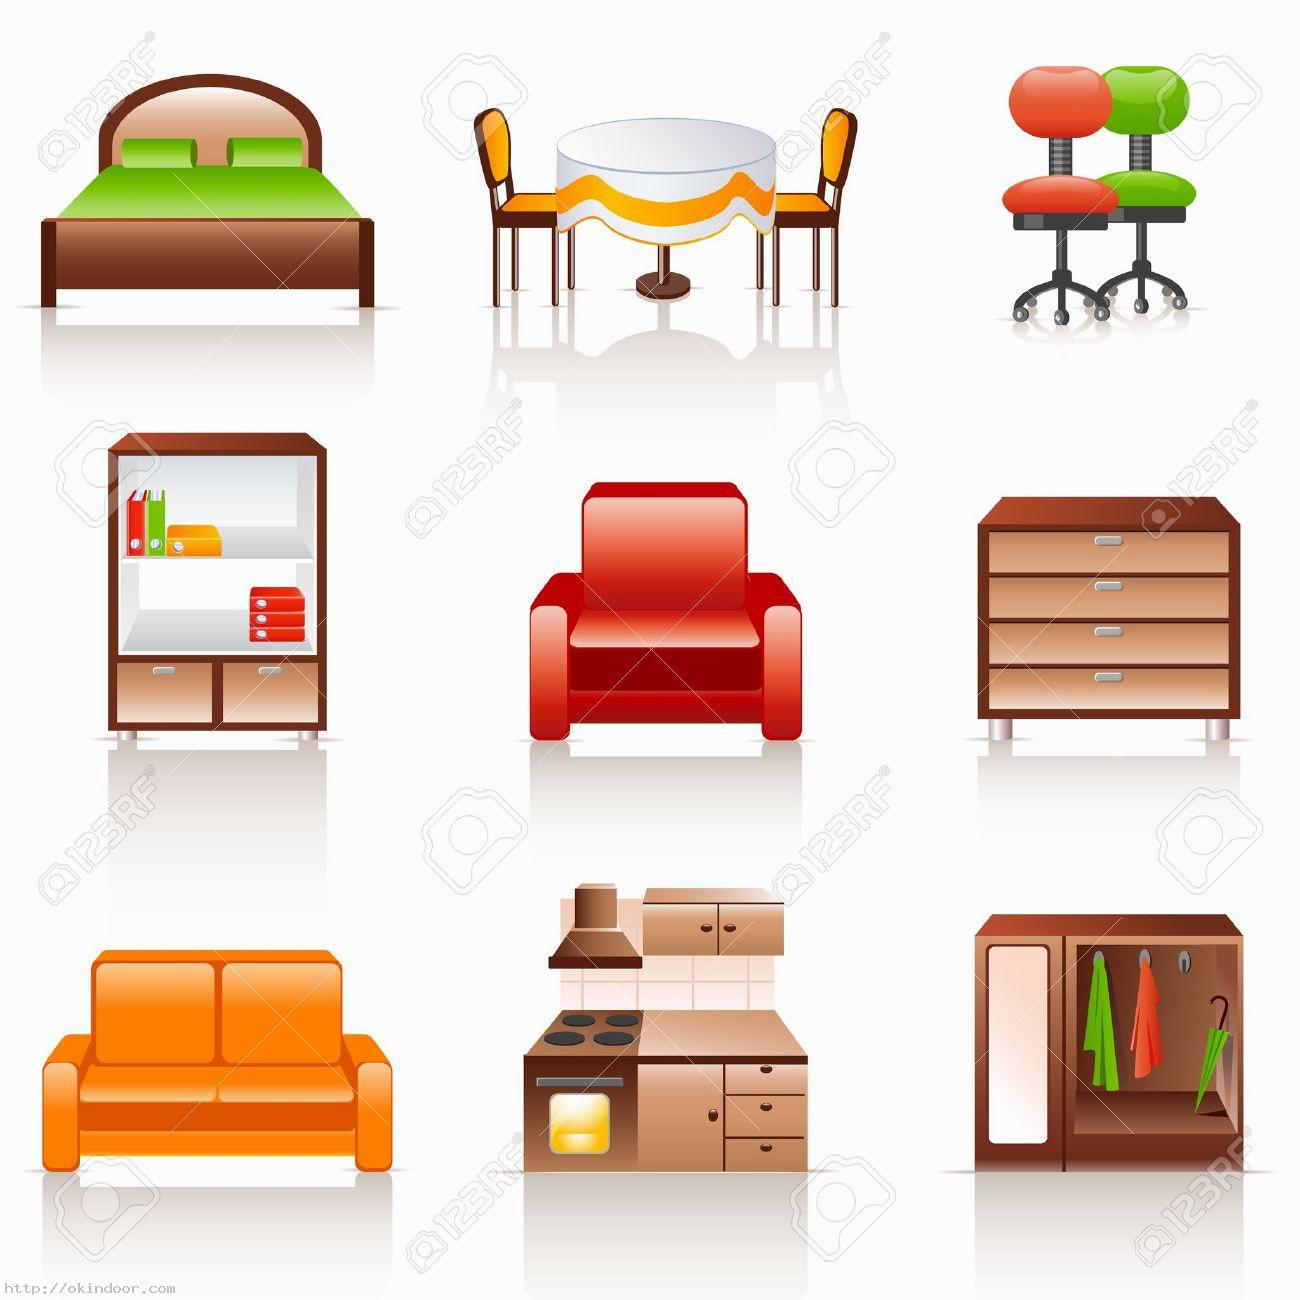 House furniture clipart.